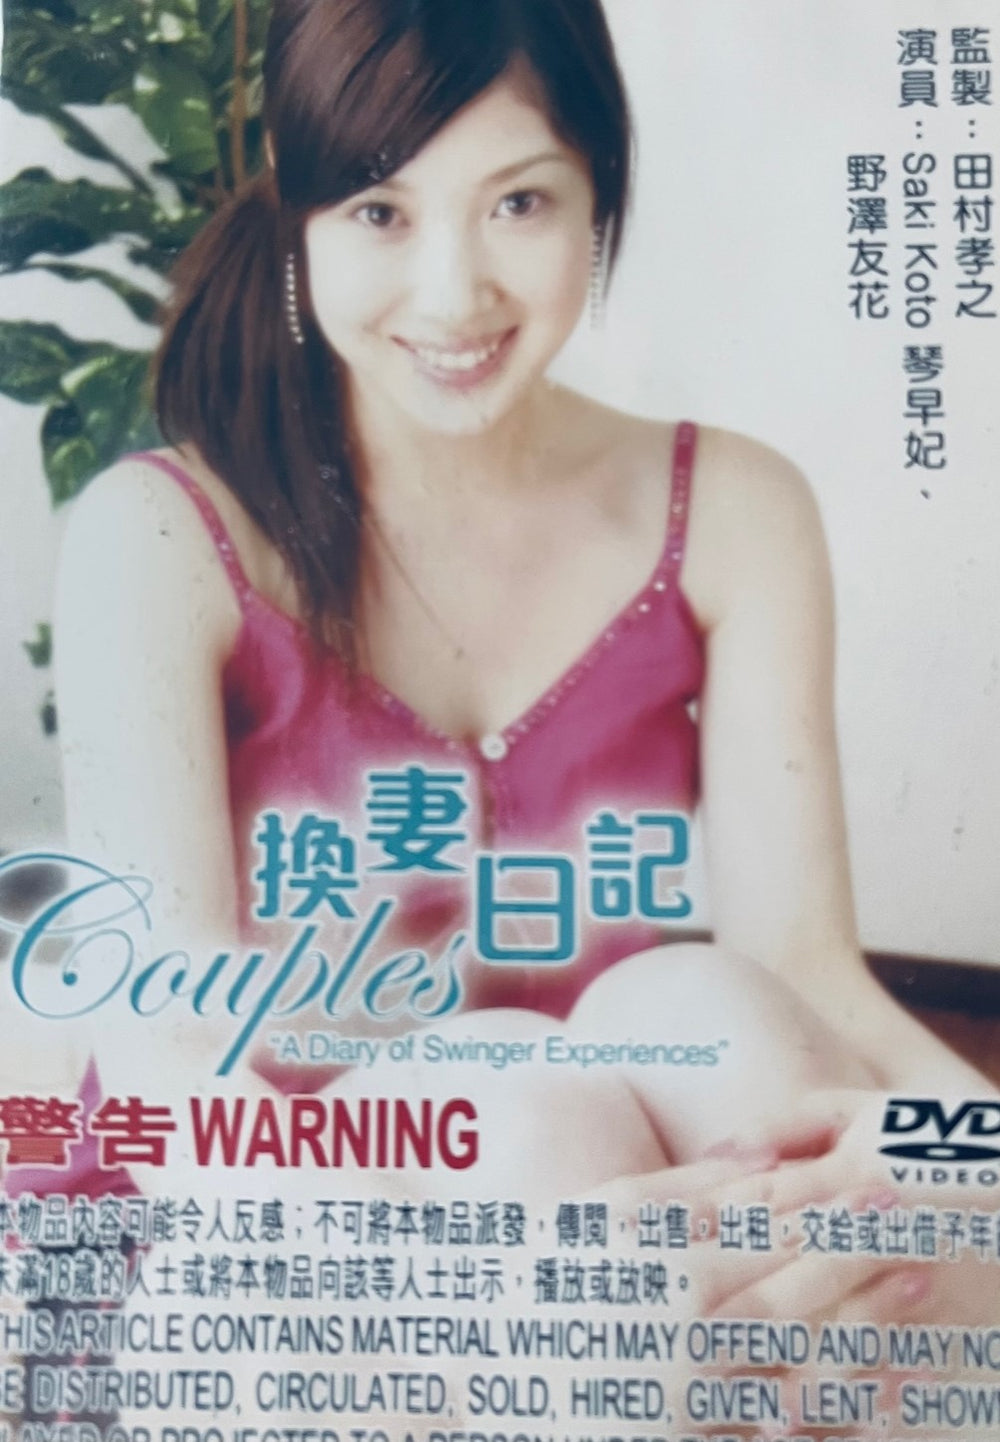 COUPLES A DIARY OF SWINGER EXPERIENCES DVD ENGLISH SUBTITLES (REGION FREE)